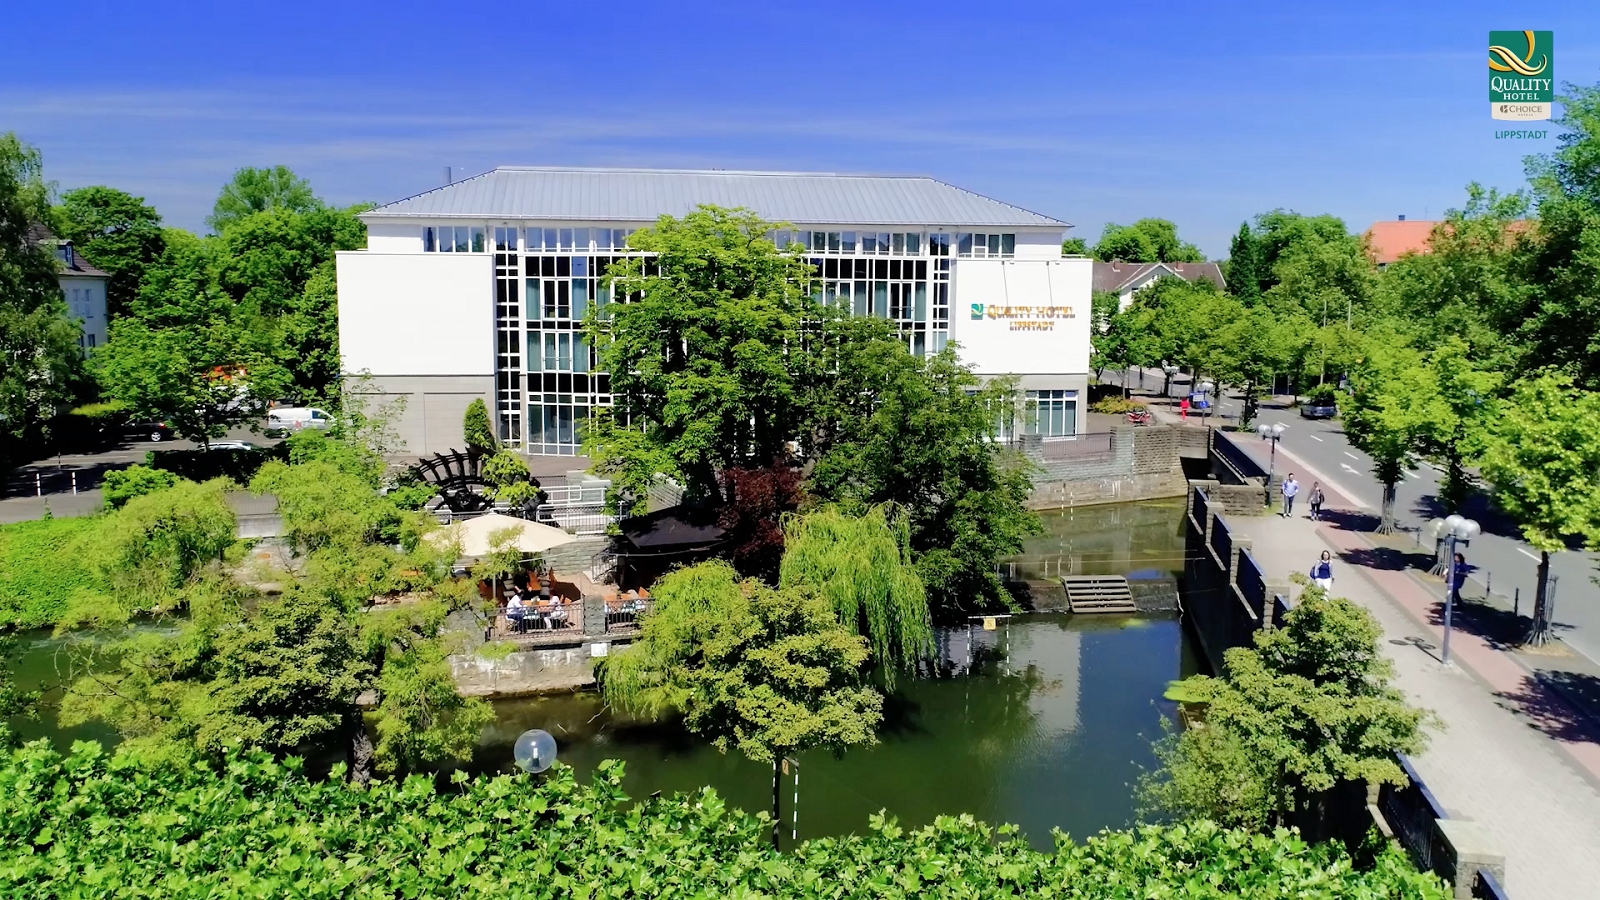 Quality Hotel Lippstadt <br/>108.50 ew <br/> <a href='http://vakantieoplossing.nl/outpage/?id=8459ba5f7a1b92158b7fef0dca03f5f8' target='_blank'>View Details</a>